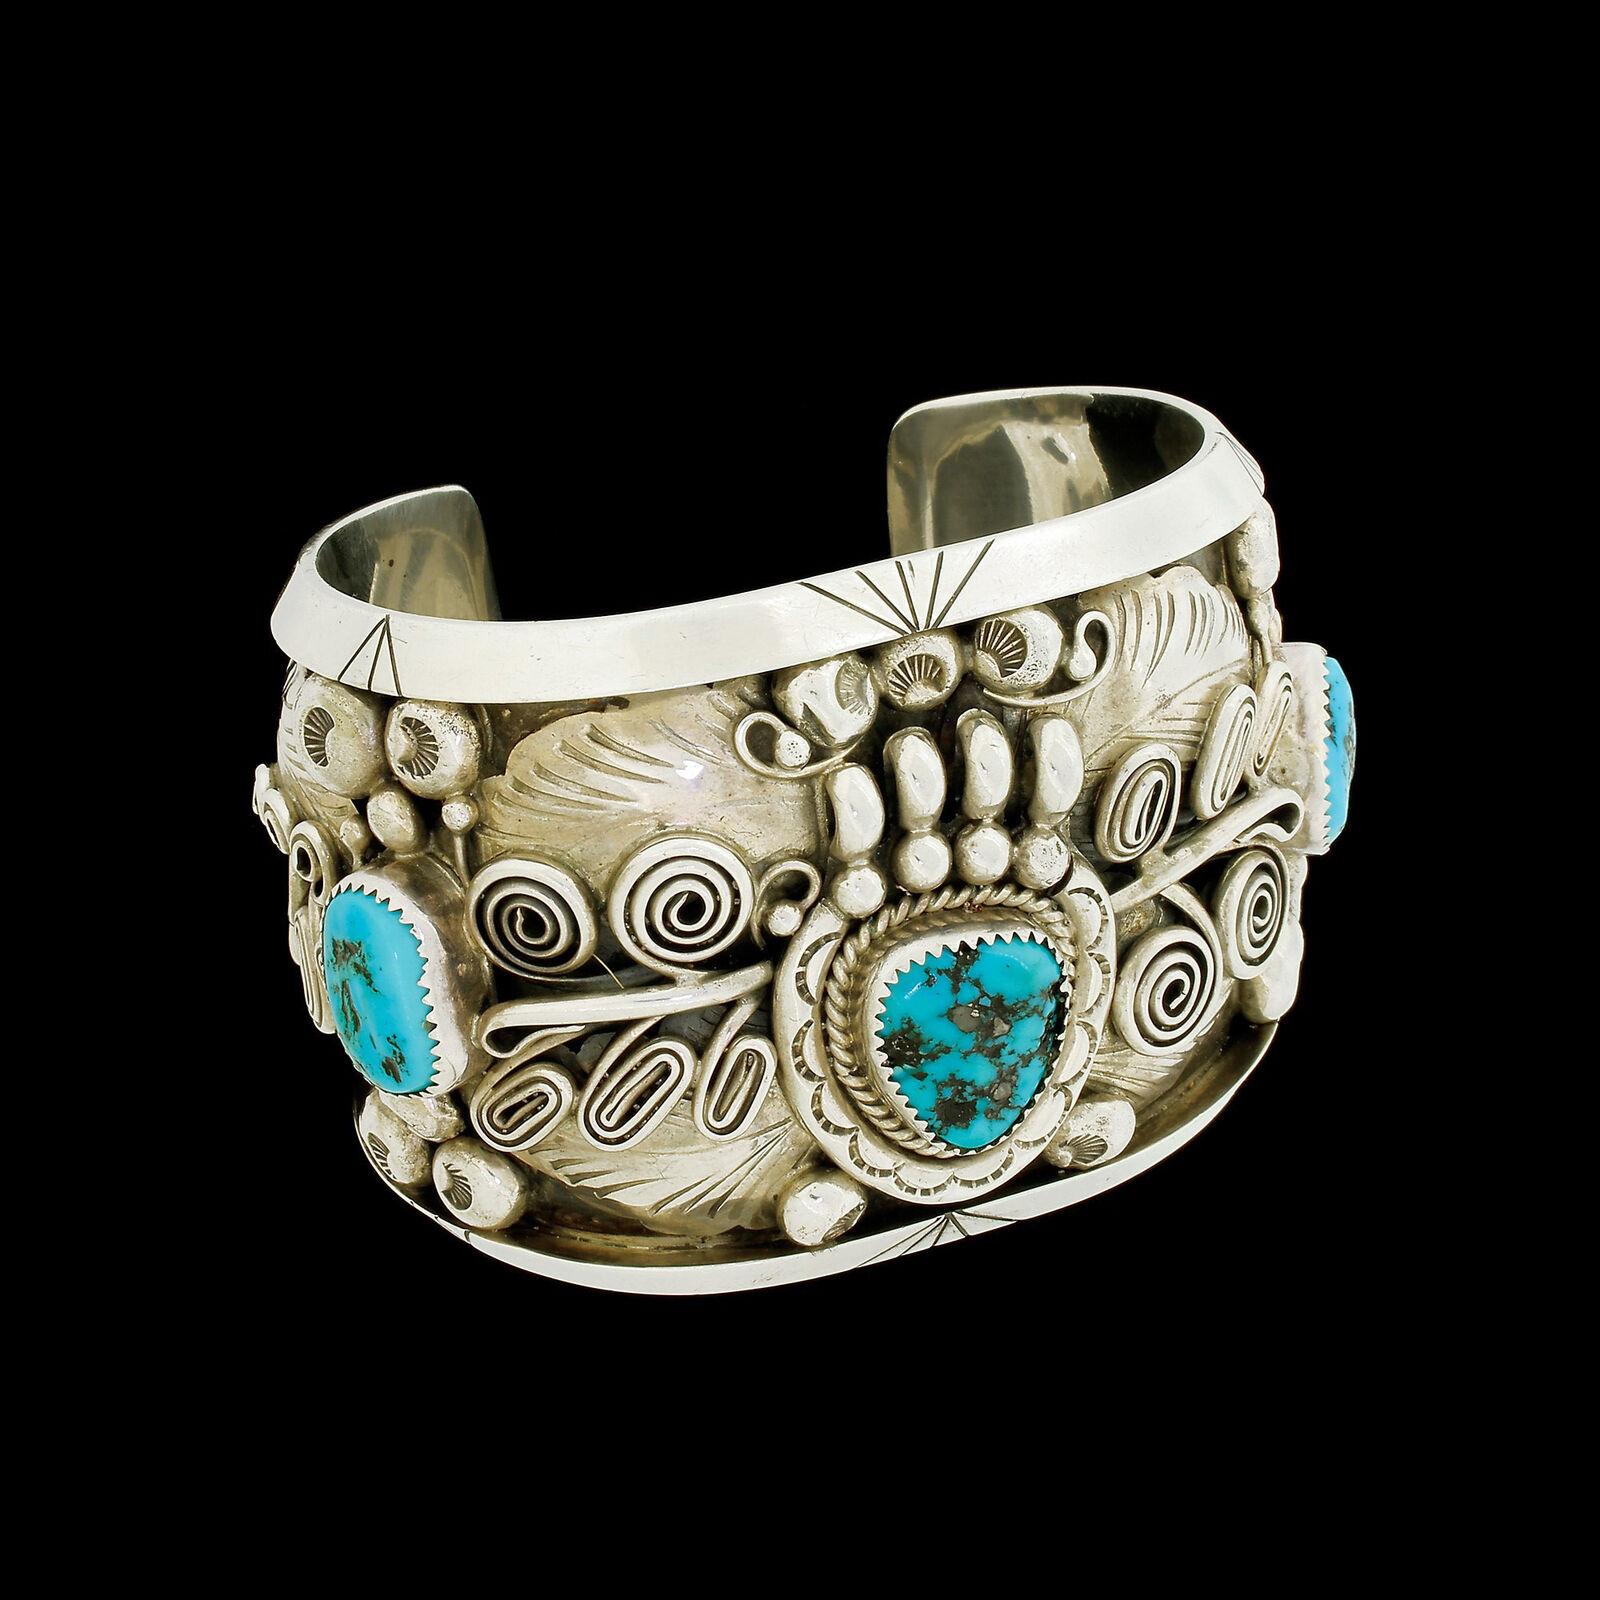 Details & Condition: Vintage Native American sterling silver cuff bracelet with beautiful ornate intricate decoration.
This piece has a lot of detailing, it is very well done - and due to the fact that it has been stored well when not in use it is